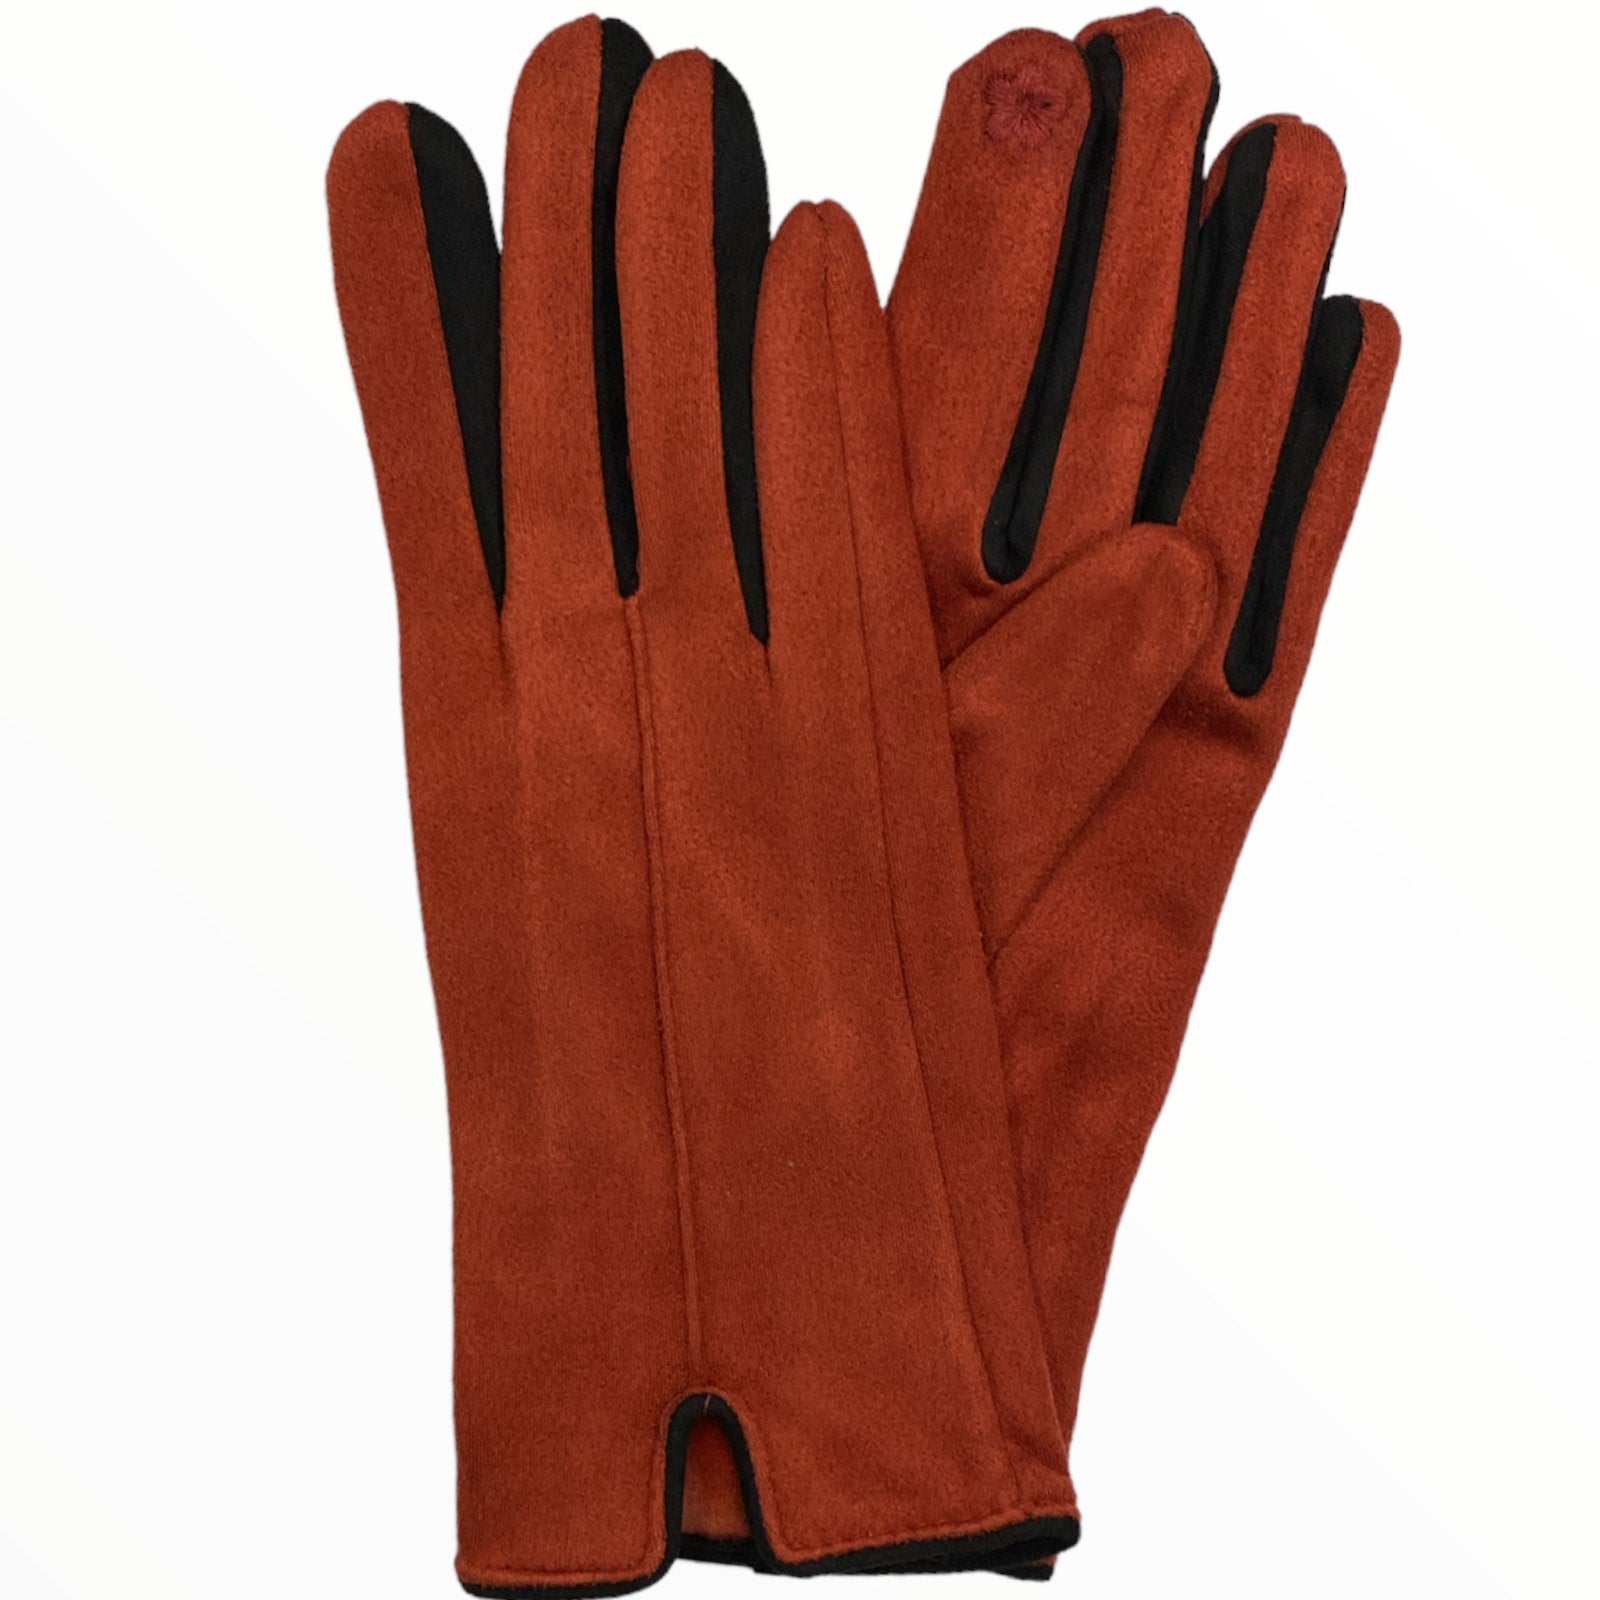 Rust chic gloves with black details